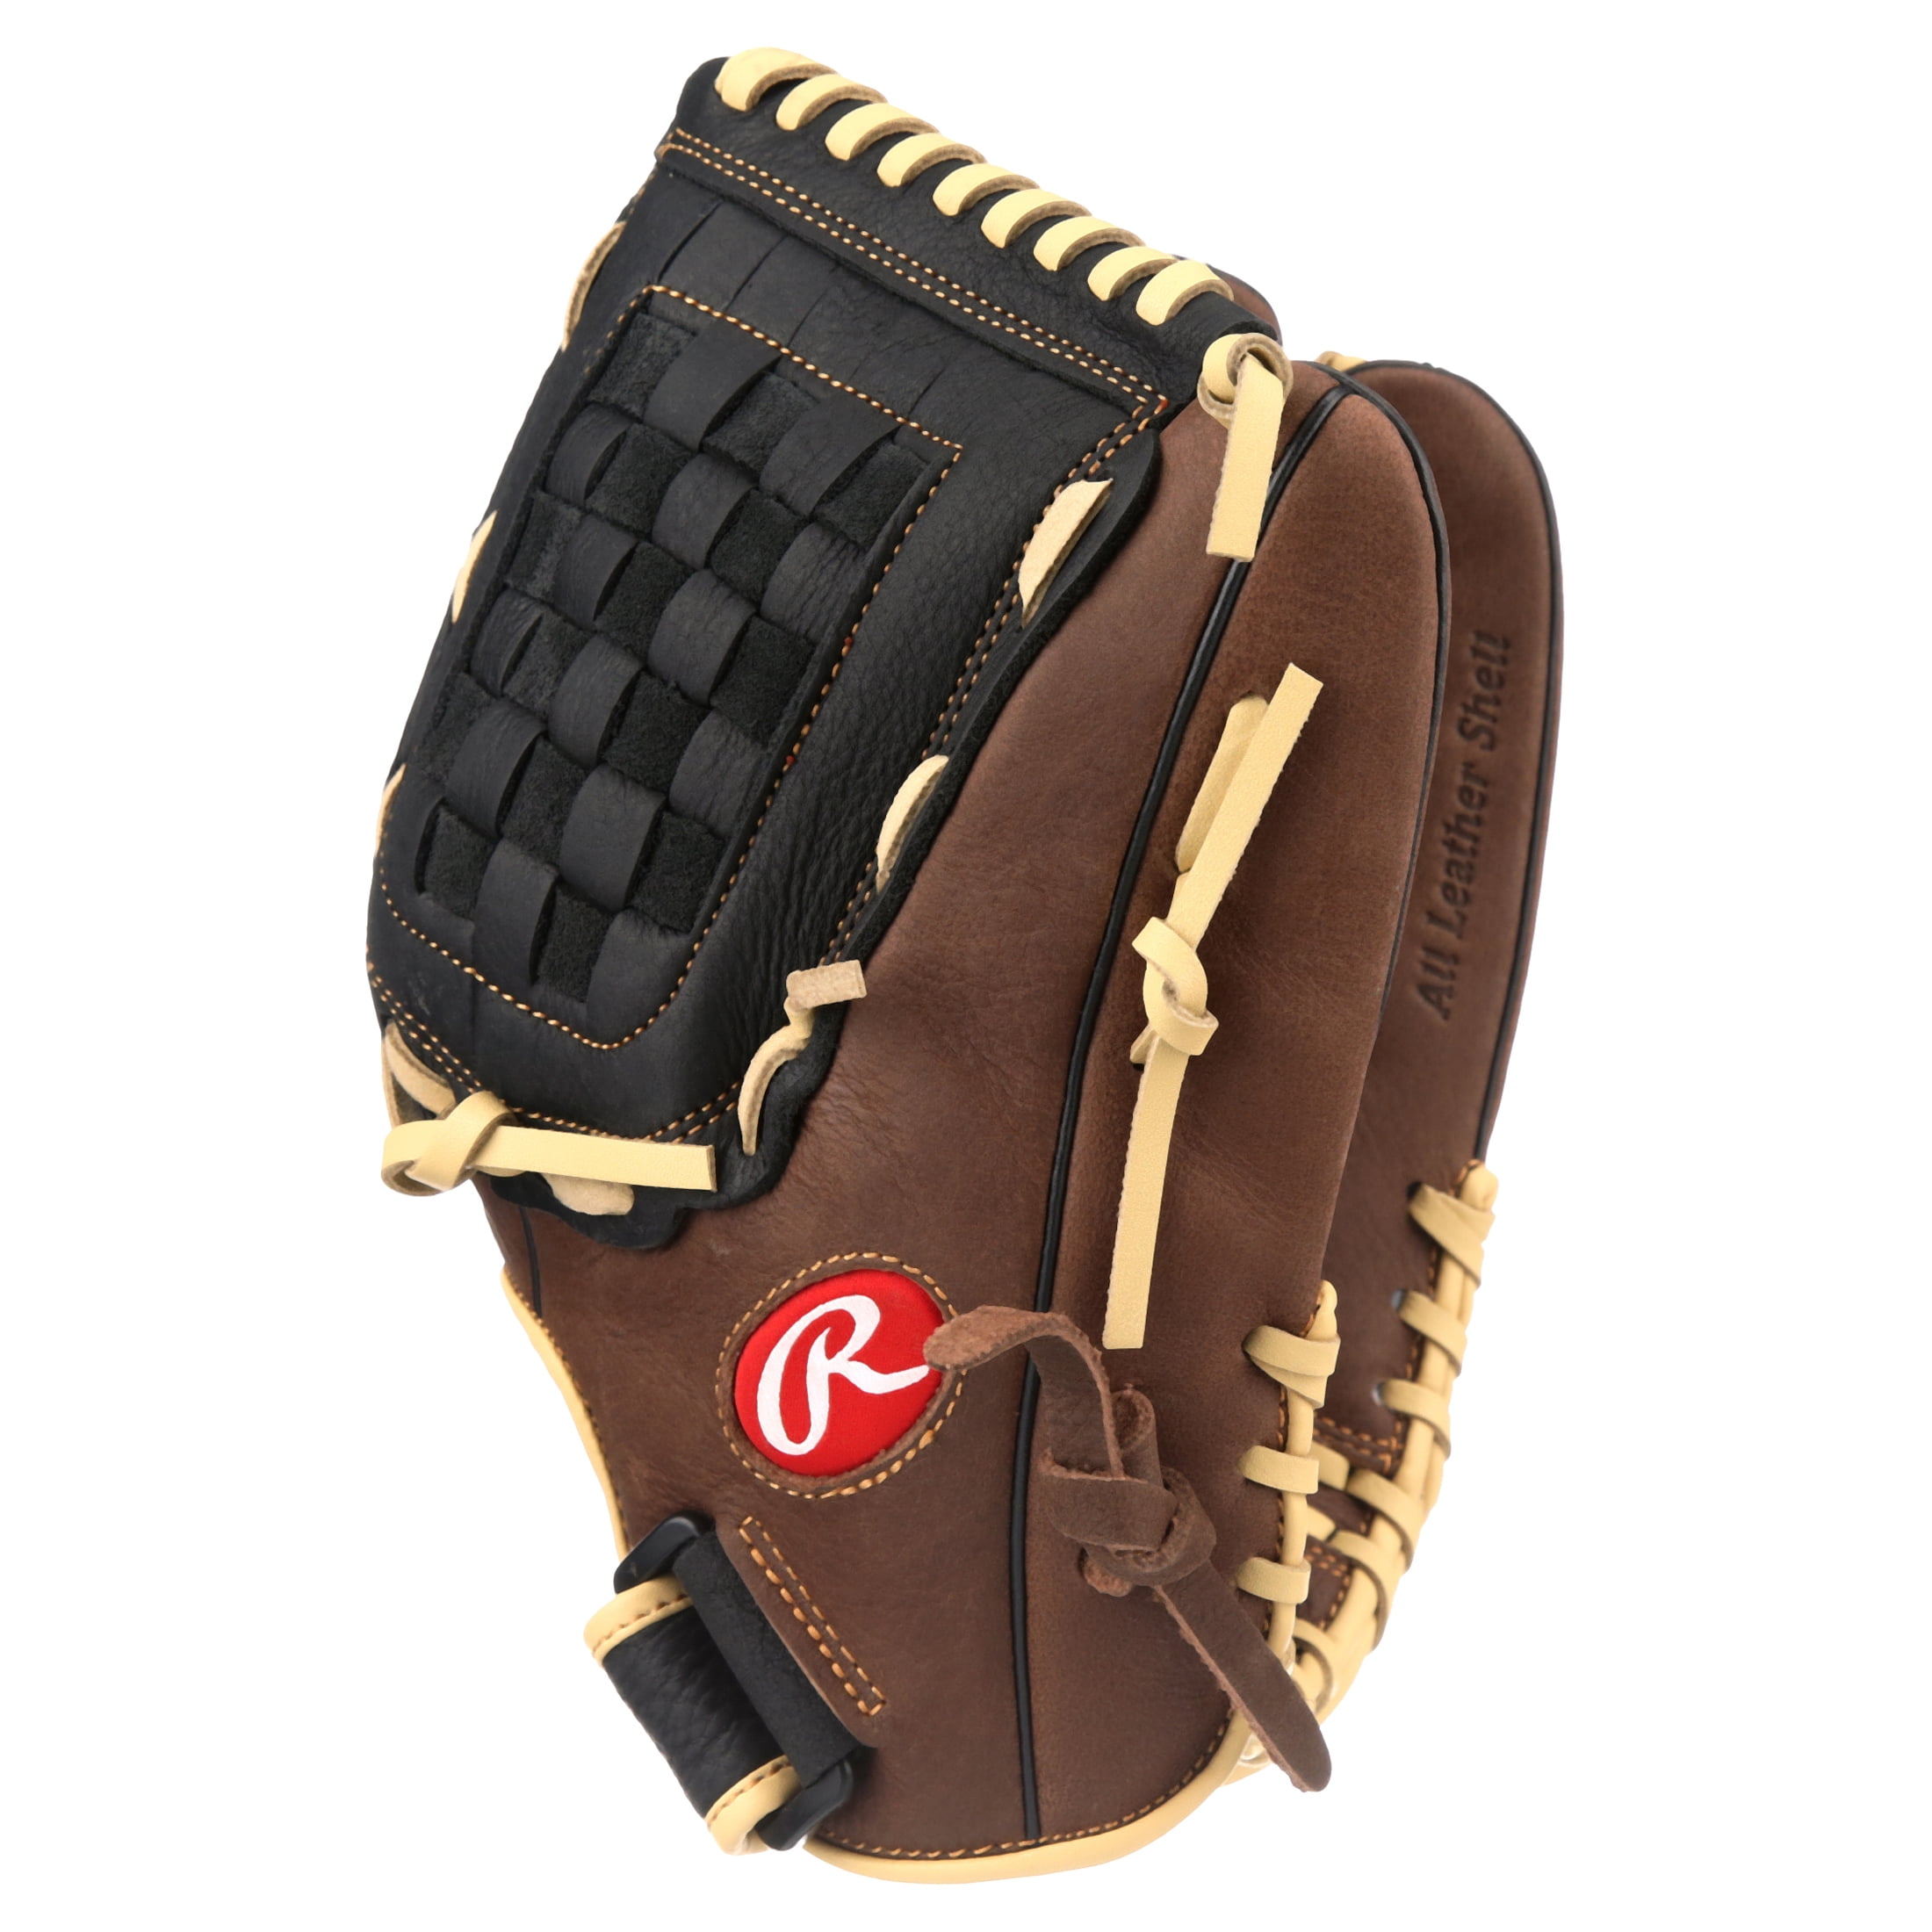 Number 13 DO NOT BUY Testing listing rawlings 